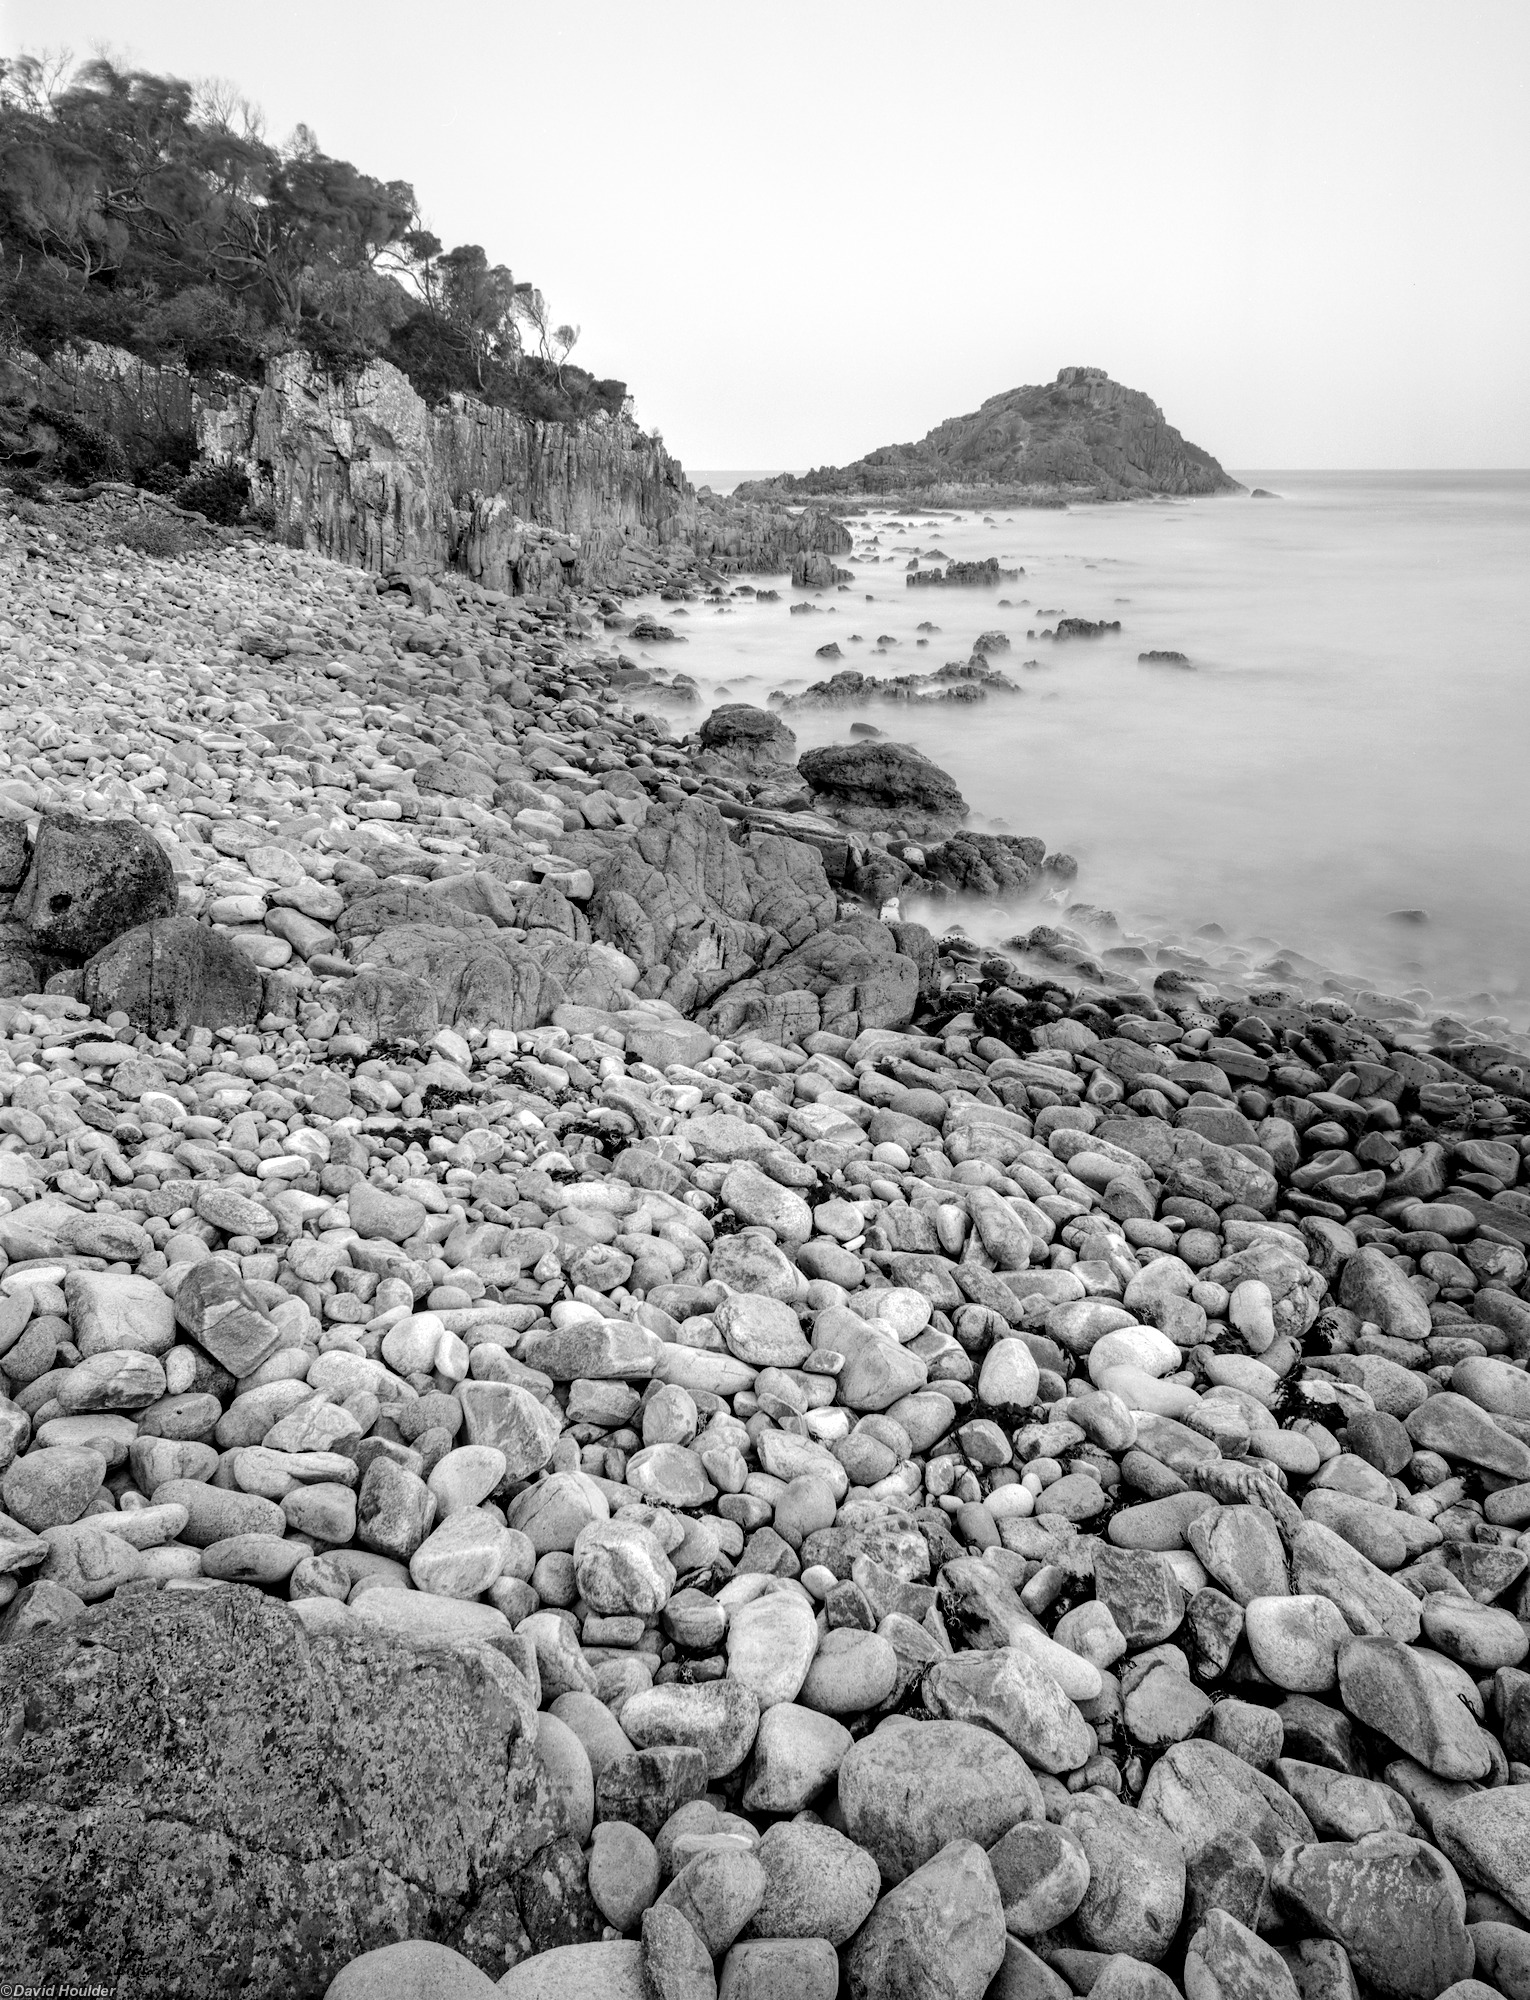 An ocean bay with a headland and a shore of rounded rocks in the foreground